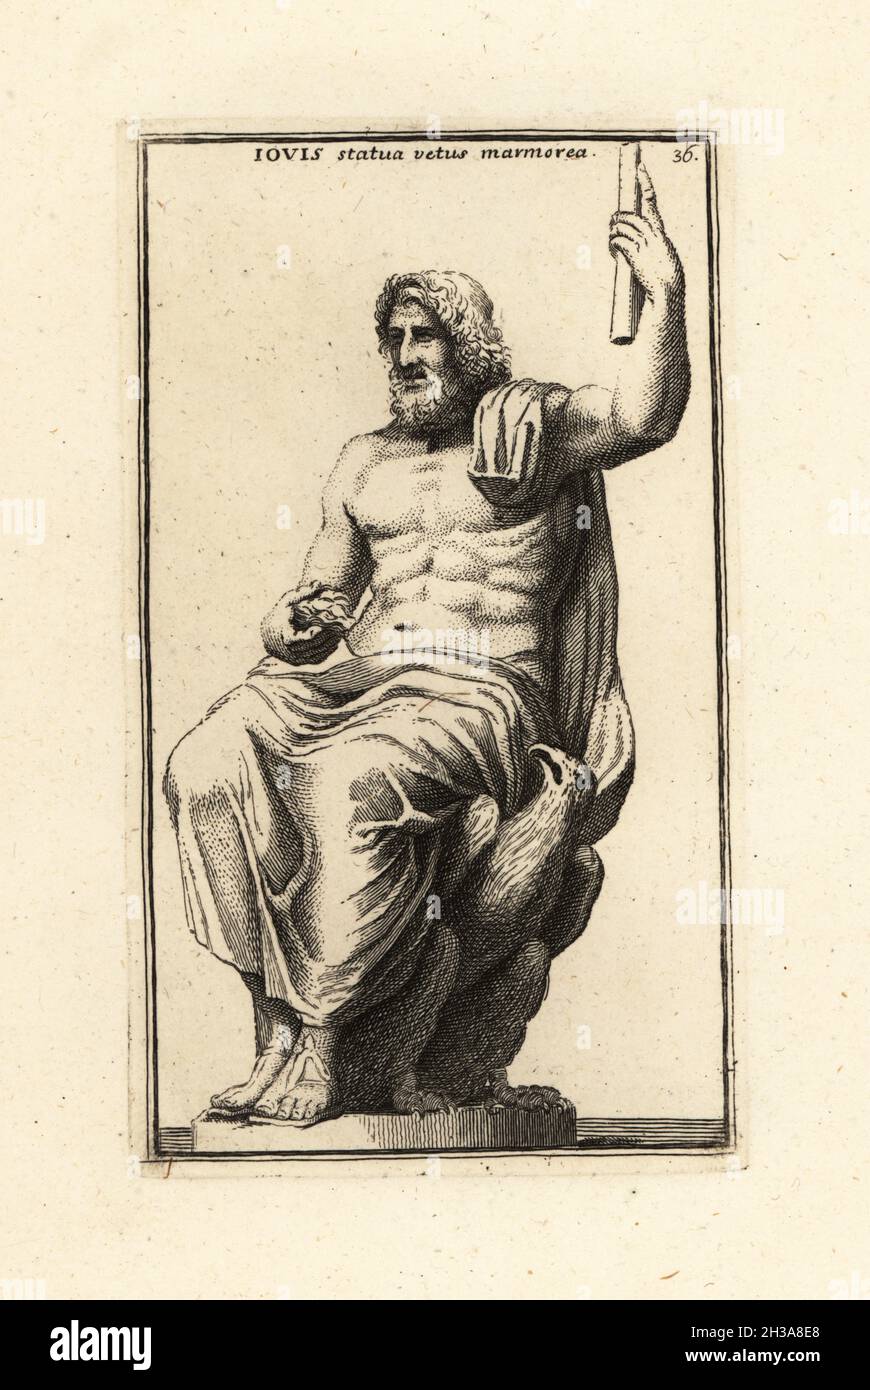 Statue of the Roman god Jove or Jupiter, seated on an eagle throne. After an original by Phidias for the Temple of Zeus. Iovis statua vetus marmorea. Copperplate engraving by Giovanni Battista Cannetti from Copperplates of the most beautiful ancient statues of Rome, Calcografia di piu belle statue antiche a Roma, engraved by Cannetti all'Arco della Ciambella, published by Gaetano Quojani, Rome, 1779. Stock Photo